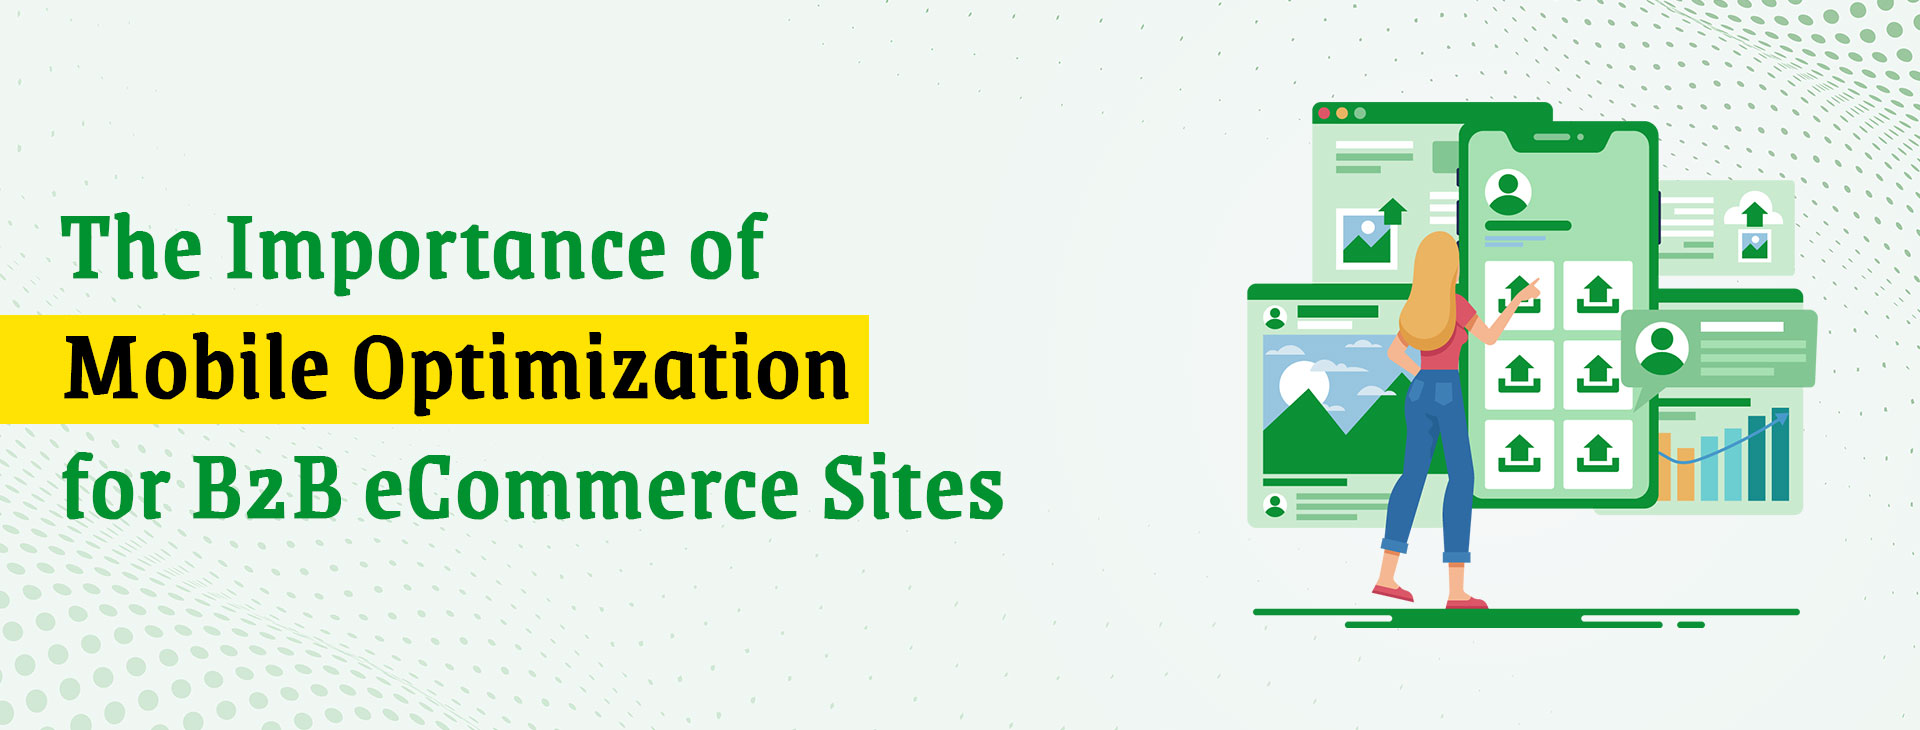 The Importance of Mobile Optimization for B2B eCommerce Sites